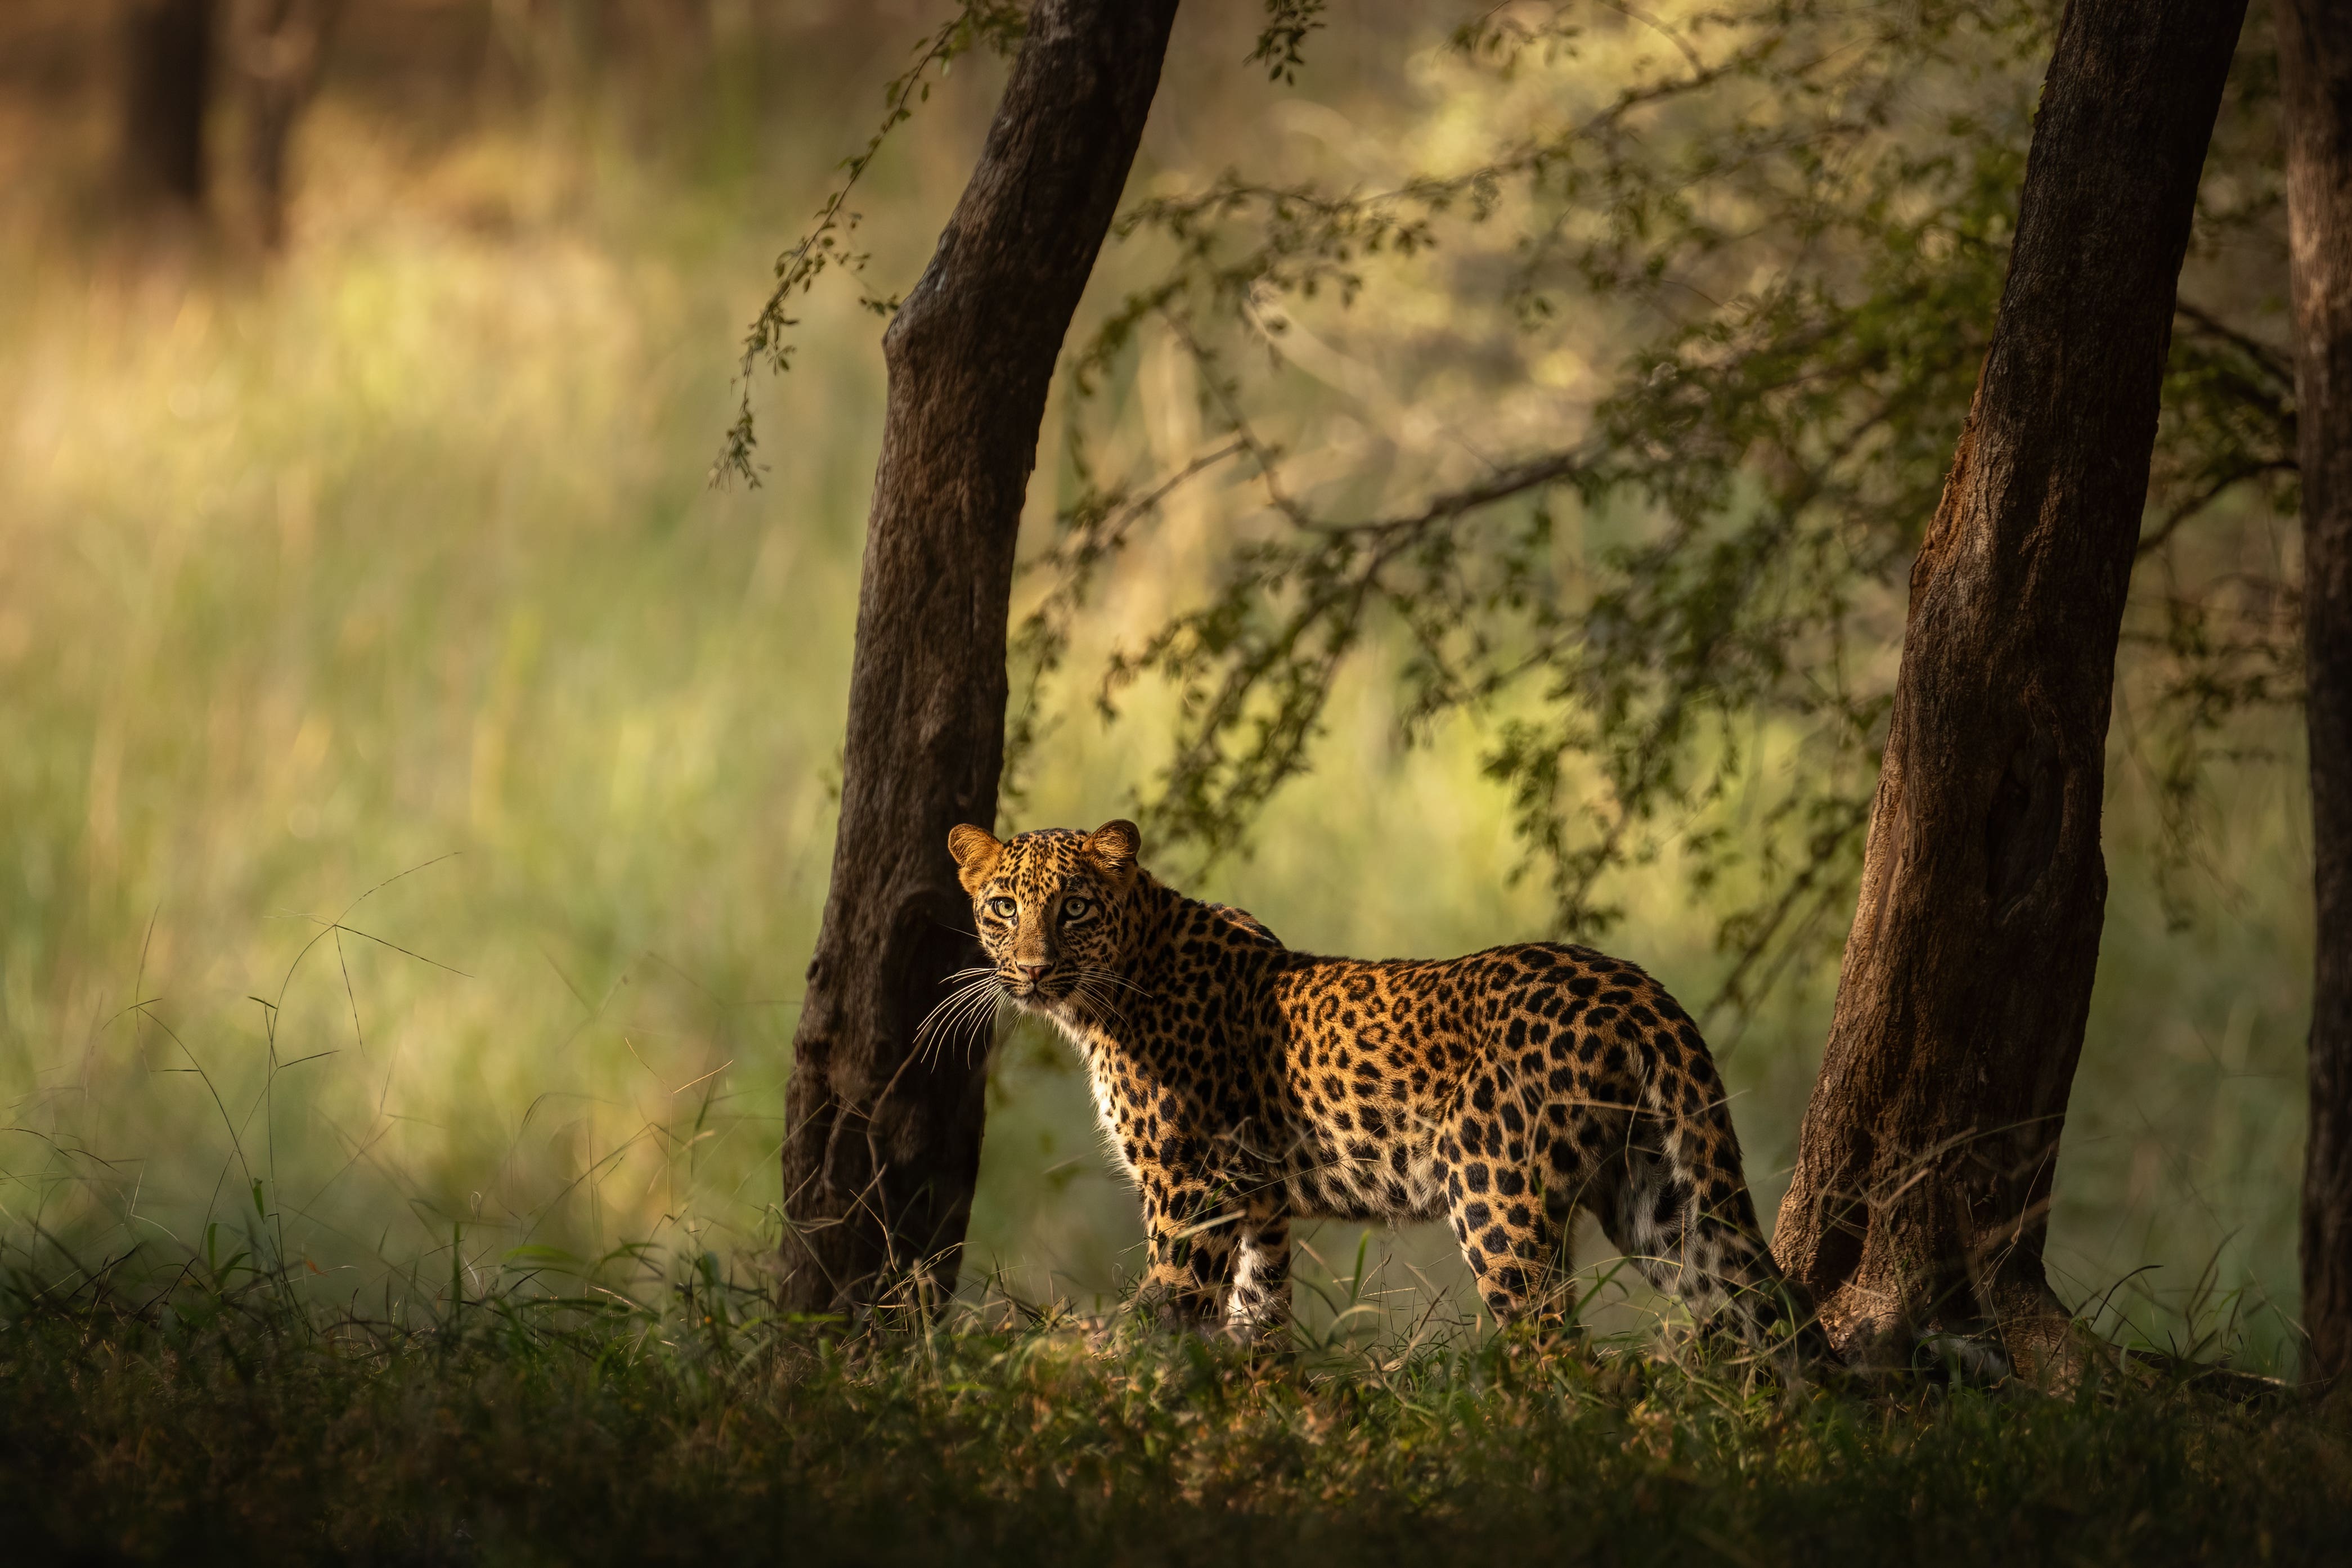 An Indian leopard in the wild (Vladimir Cech Jnr/Remembering Leopards/PA)